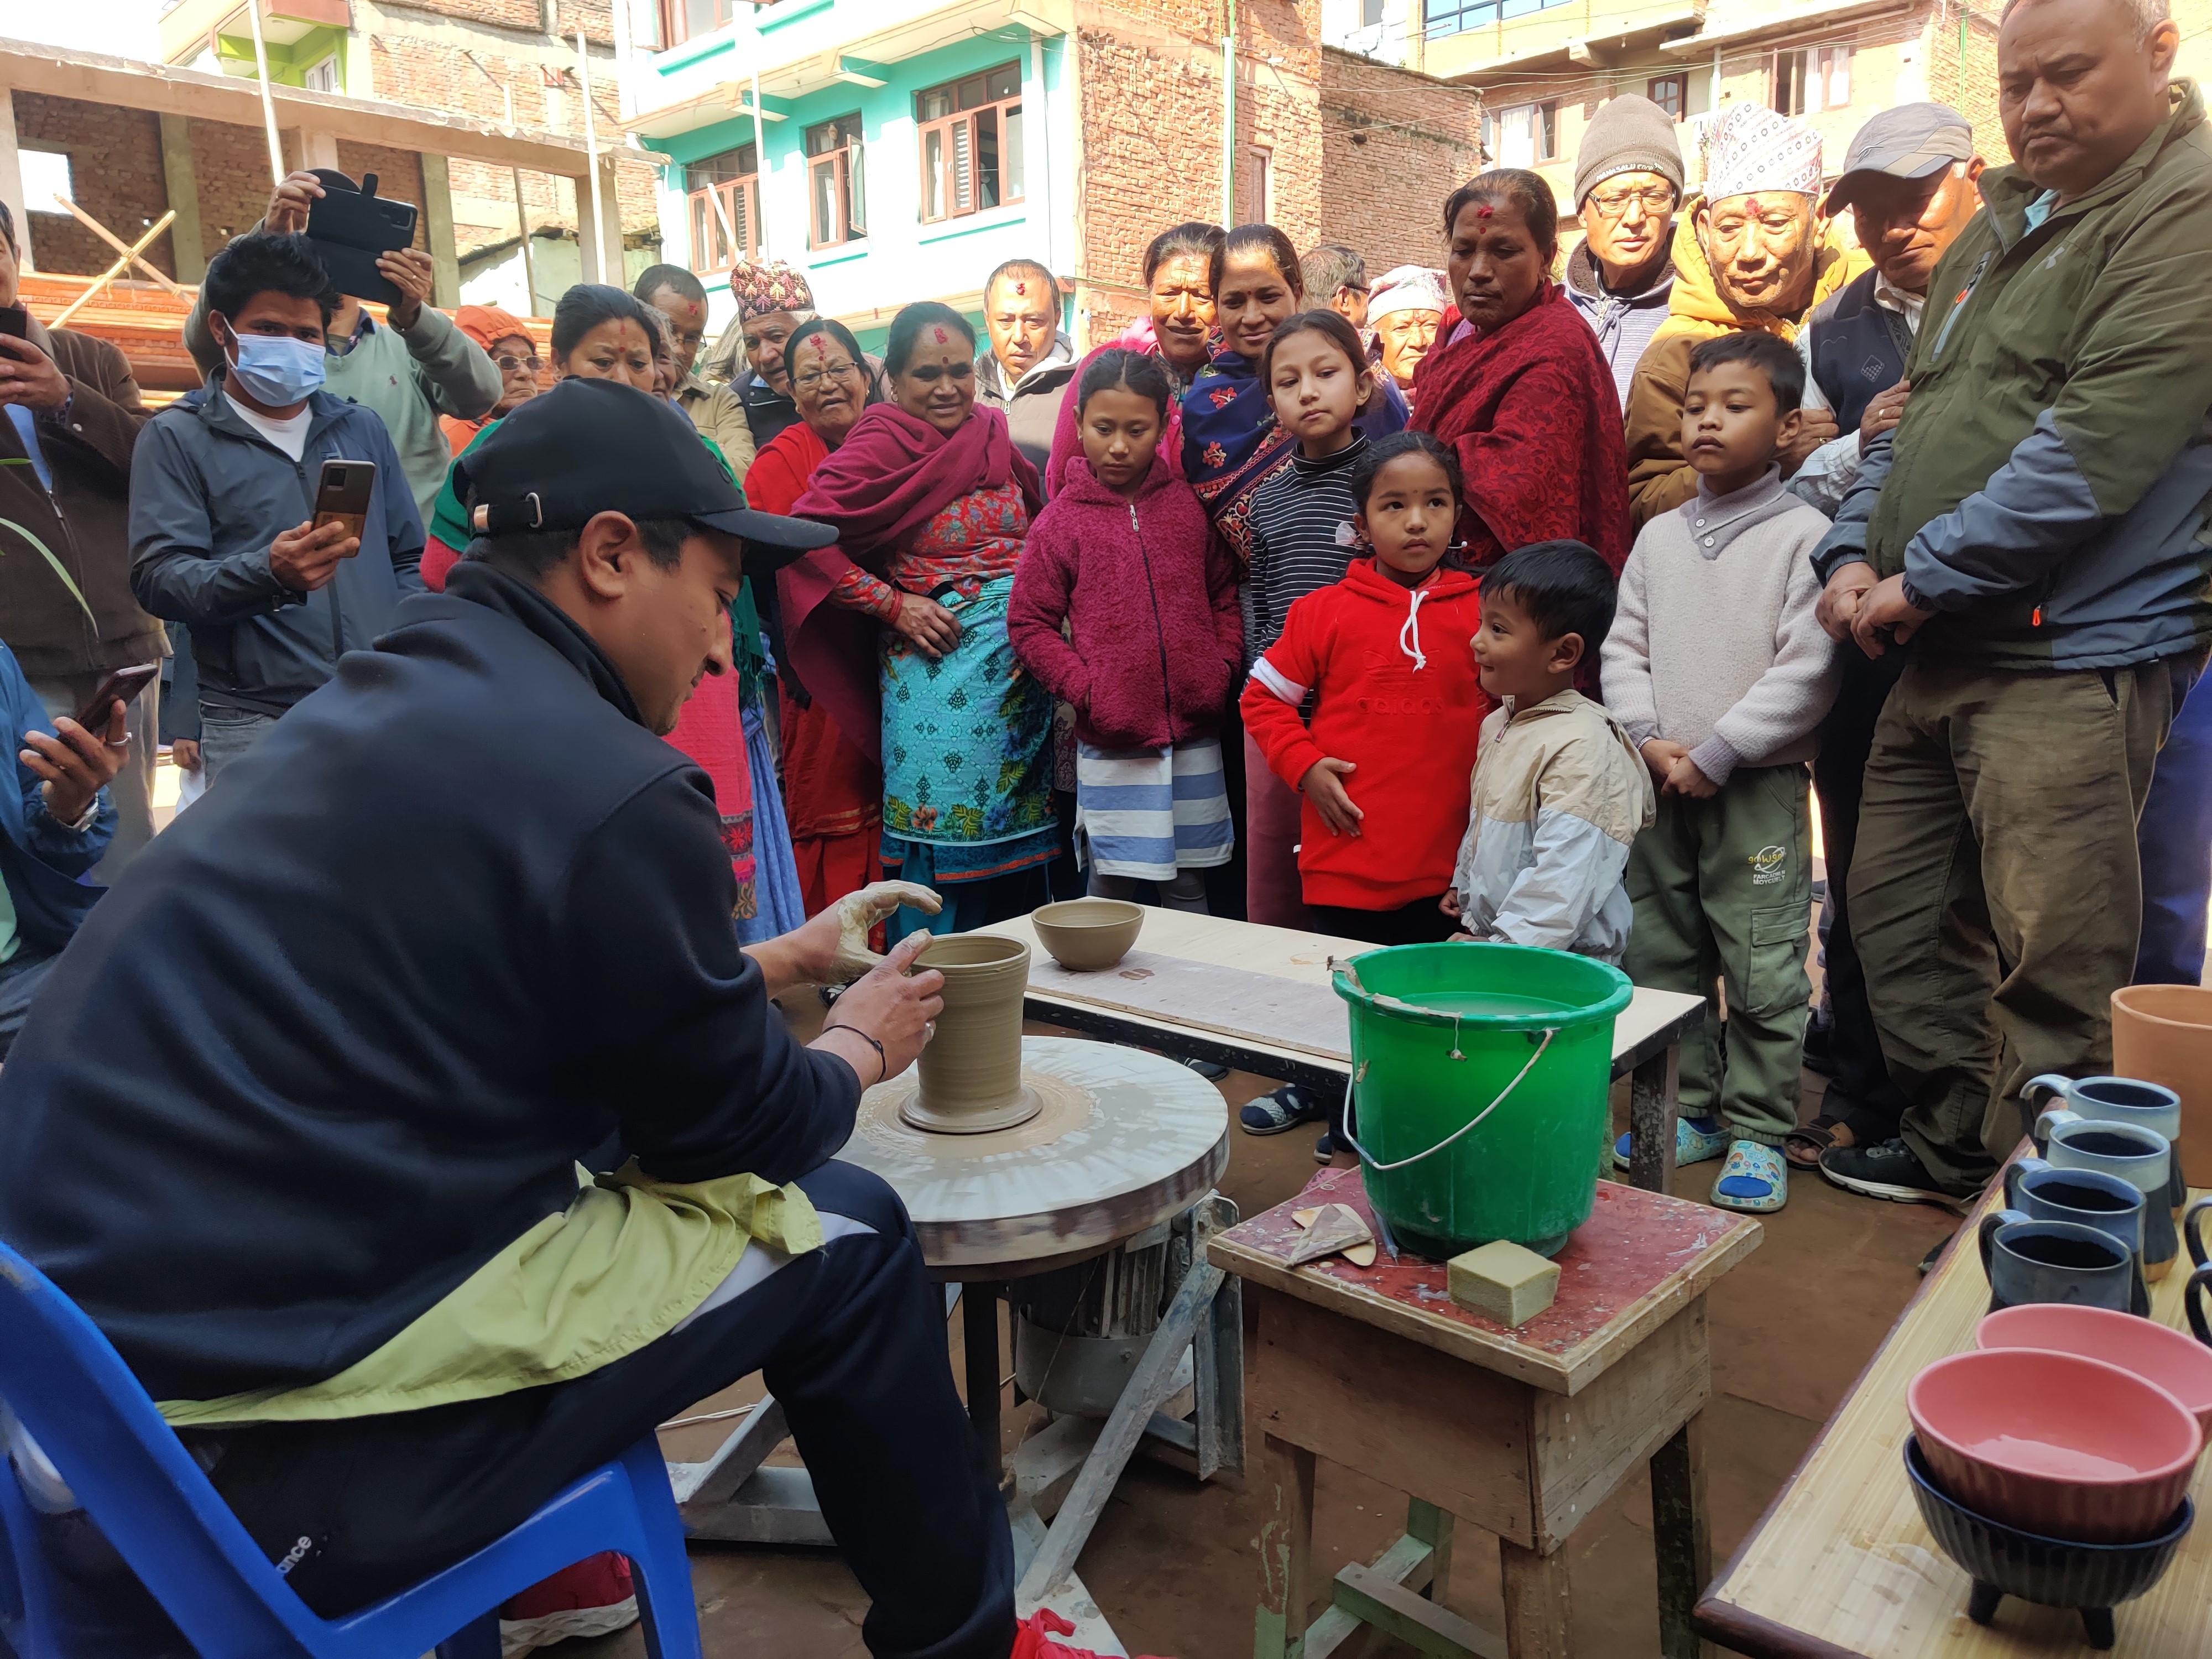 Visitors observing the live exhibition of pottery making showcasing the Newa culture during Harisiddhi Art Mela, held on Tuesday, January 2. Photo: Nasana Bajracharya